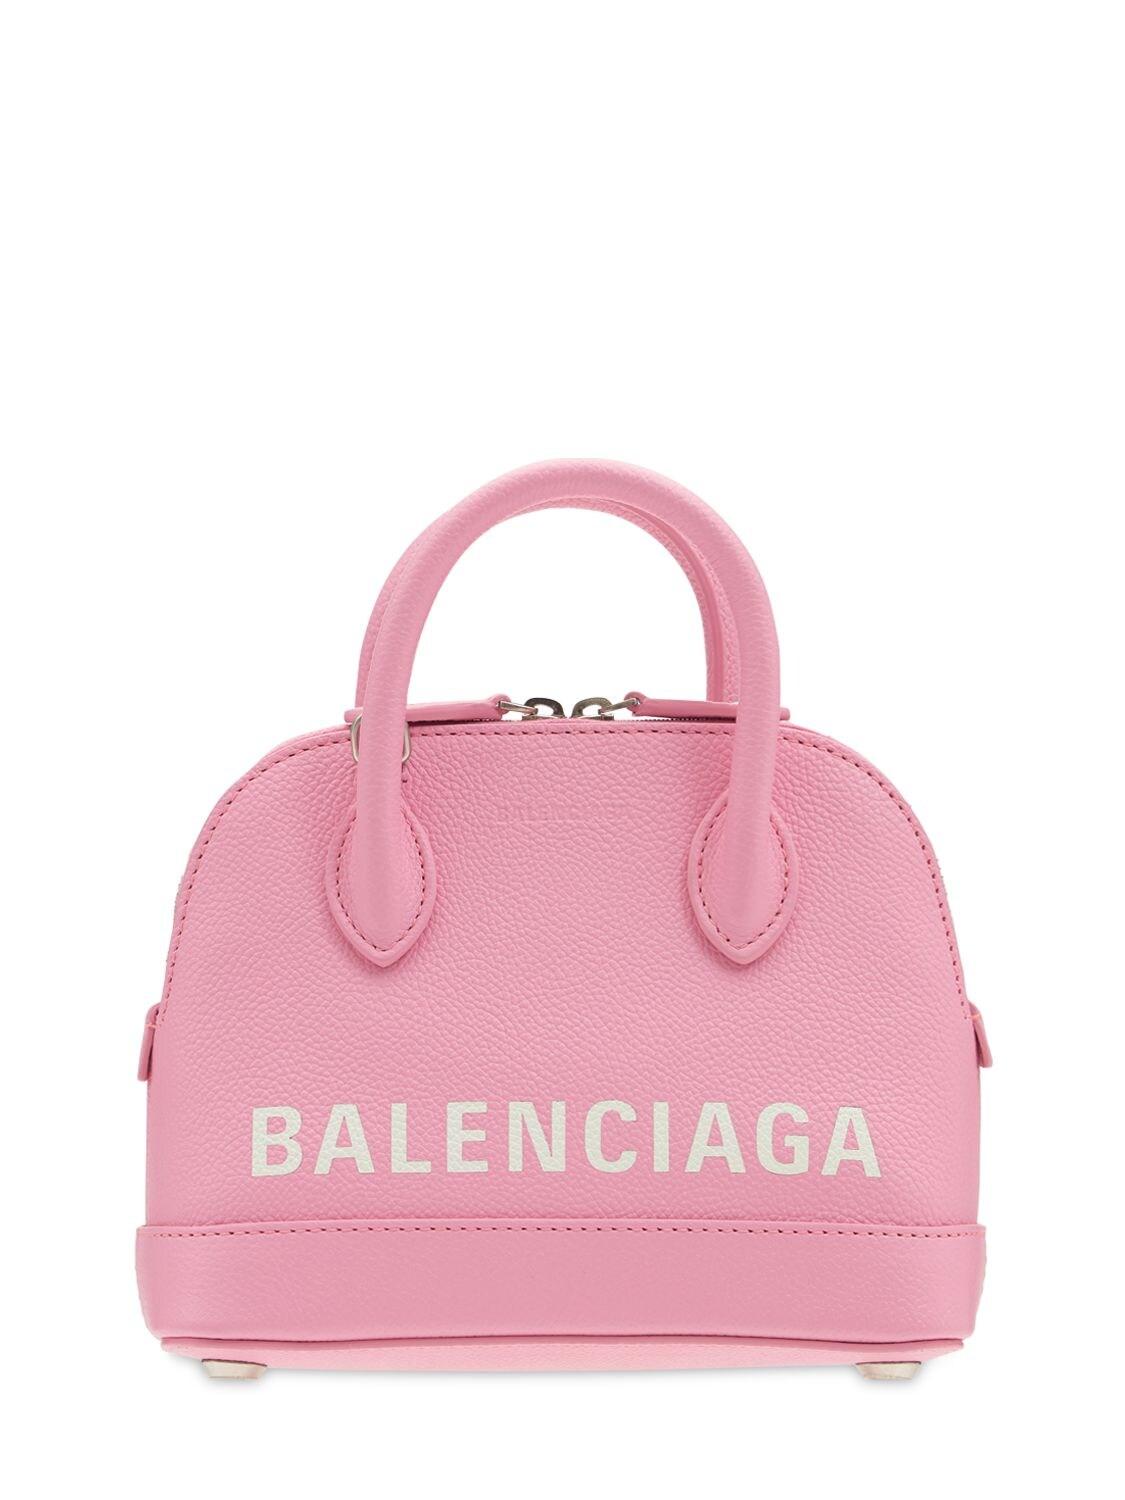 Balenciaga Xxs Ville Grained Leather Top Handle Bag in Rose /White (Pink) -  Save 75% | Lyst